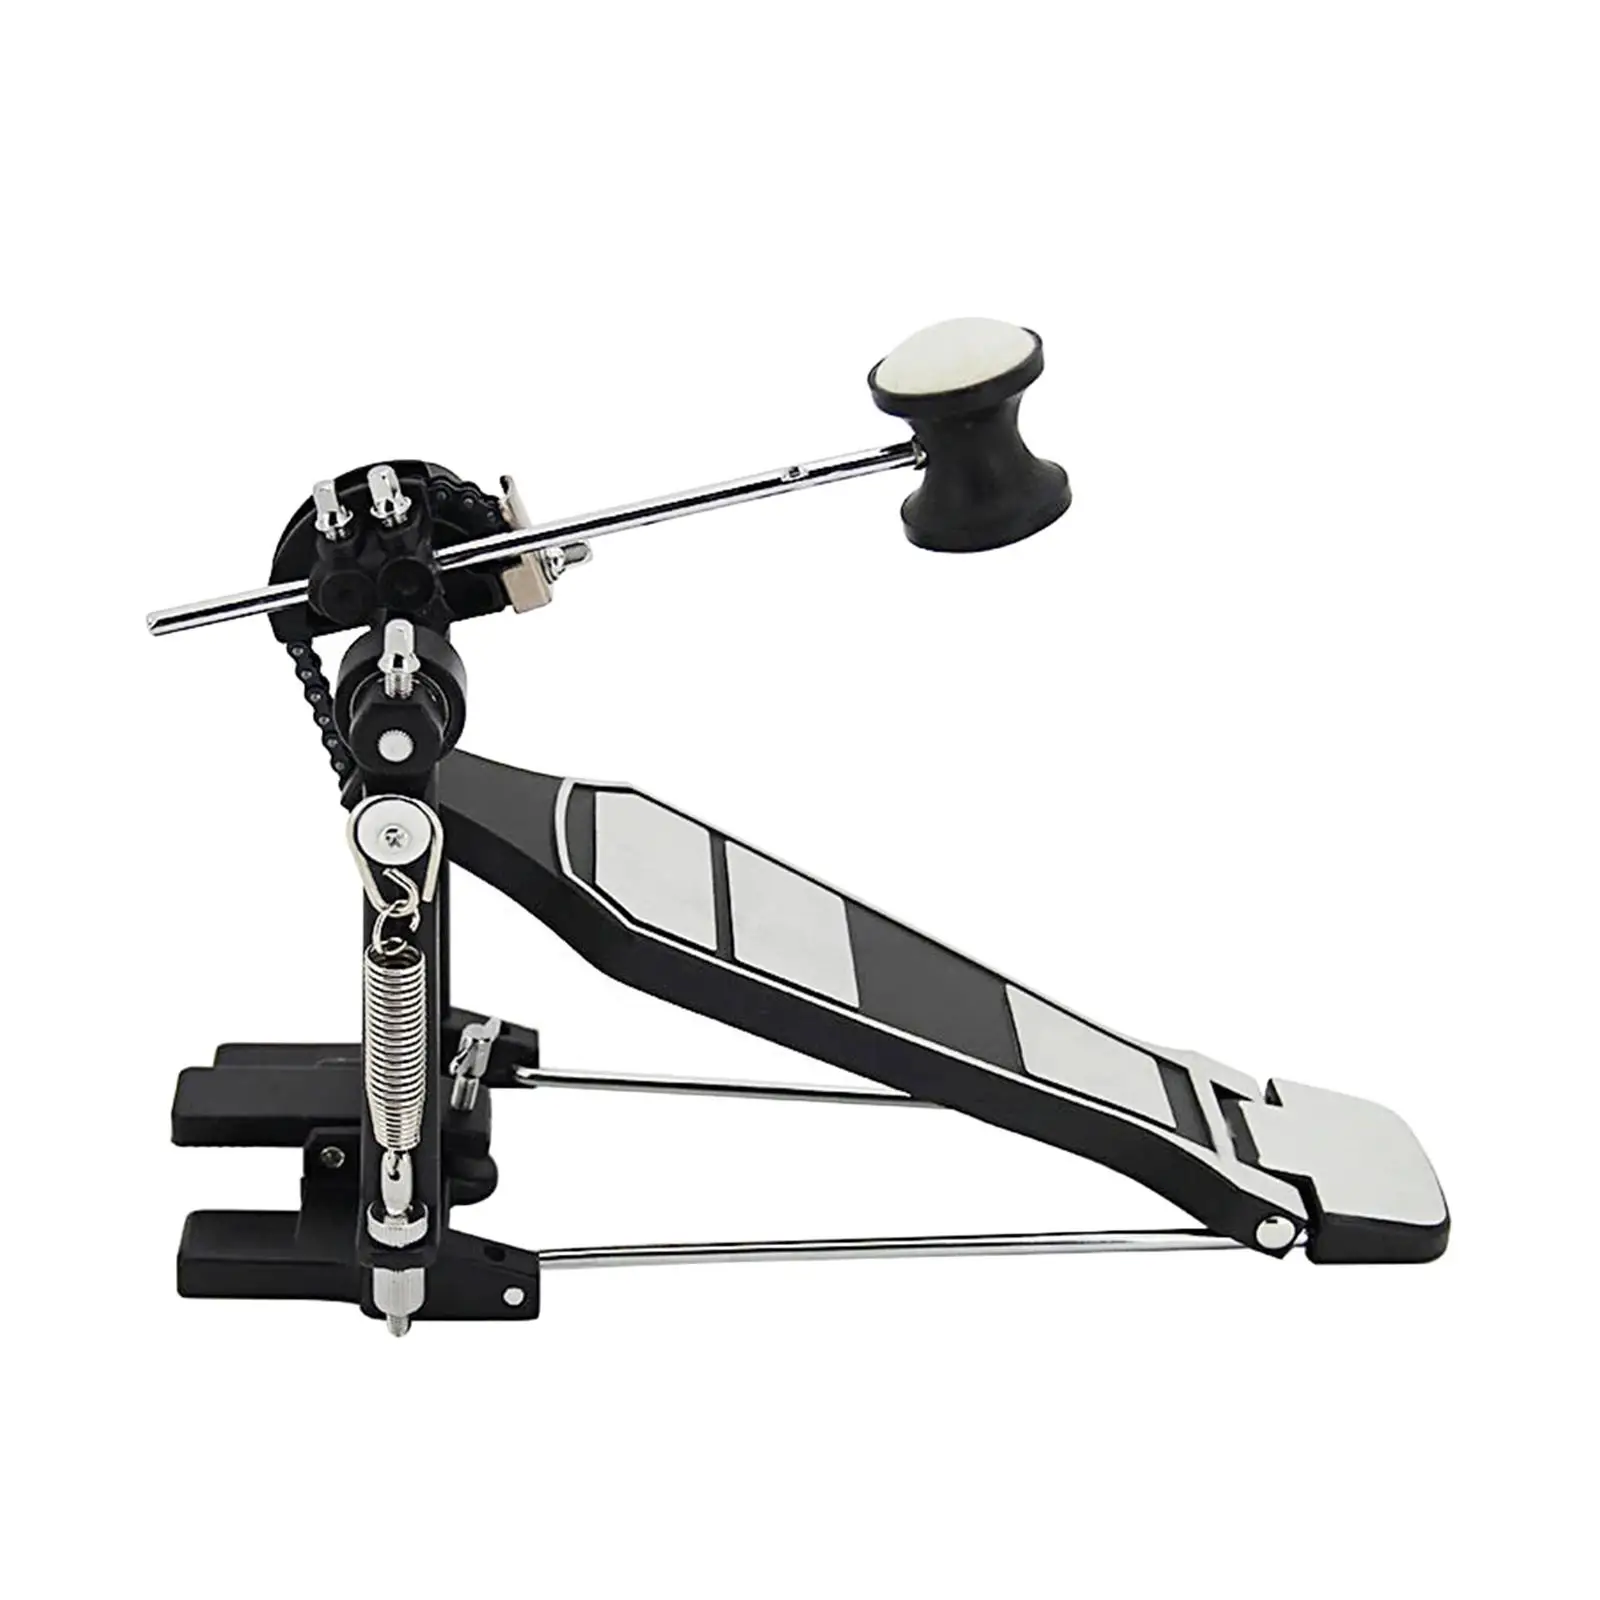 Bass Drum Pedal Drum Step on Beater Fully Adjustable Durable